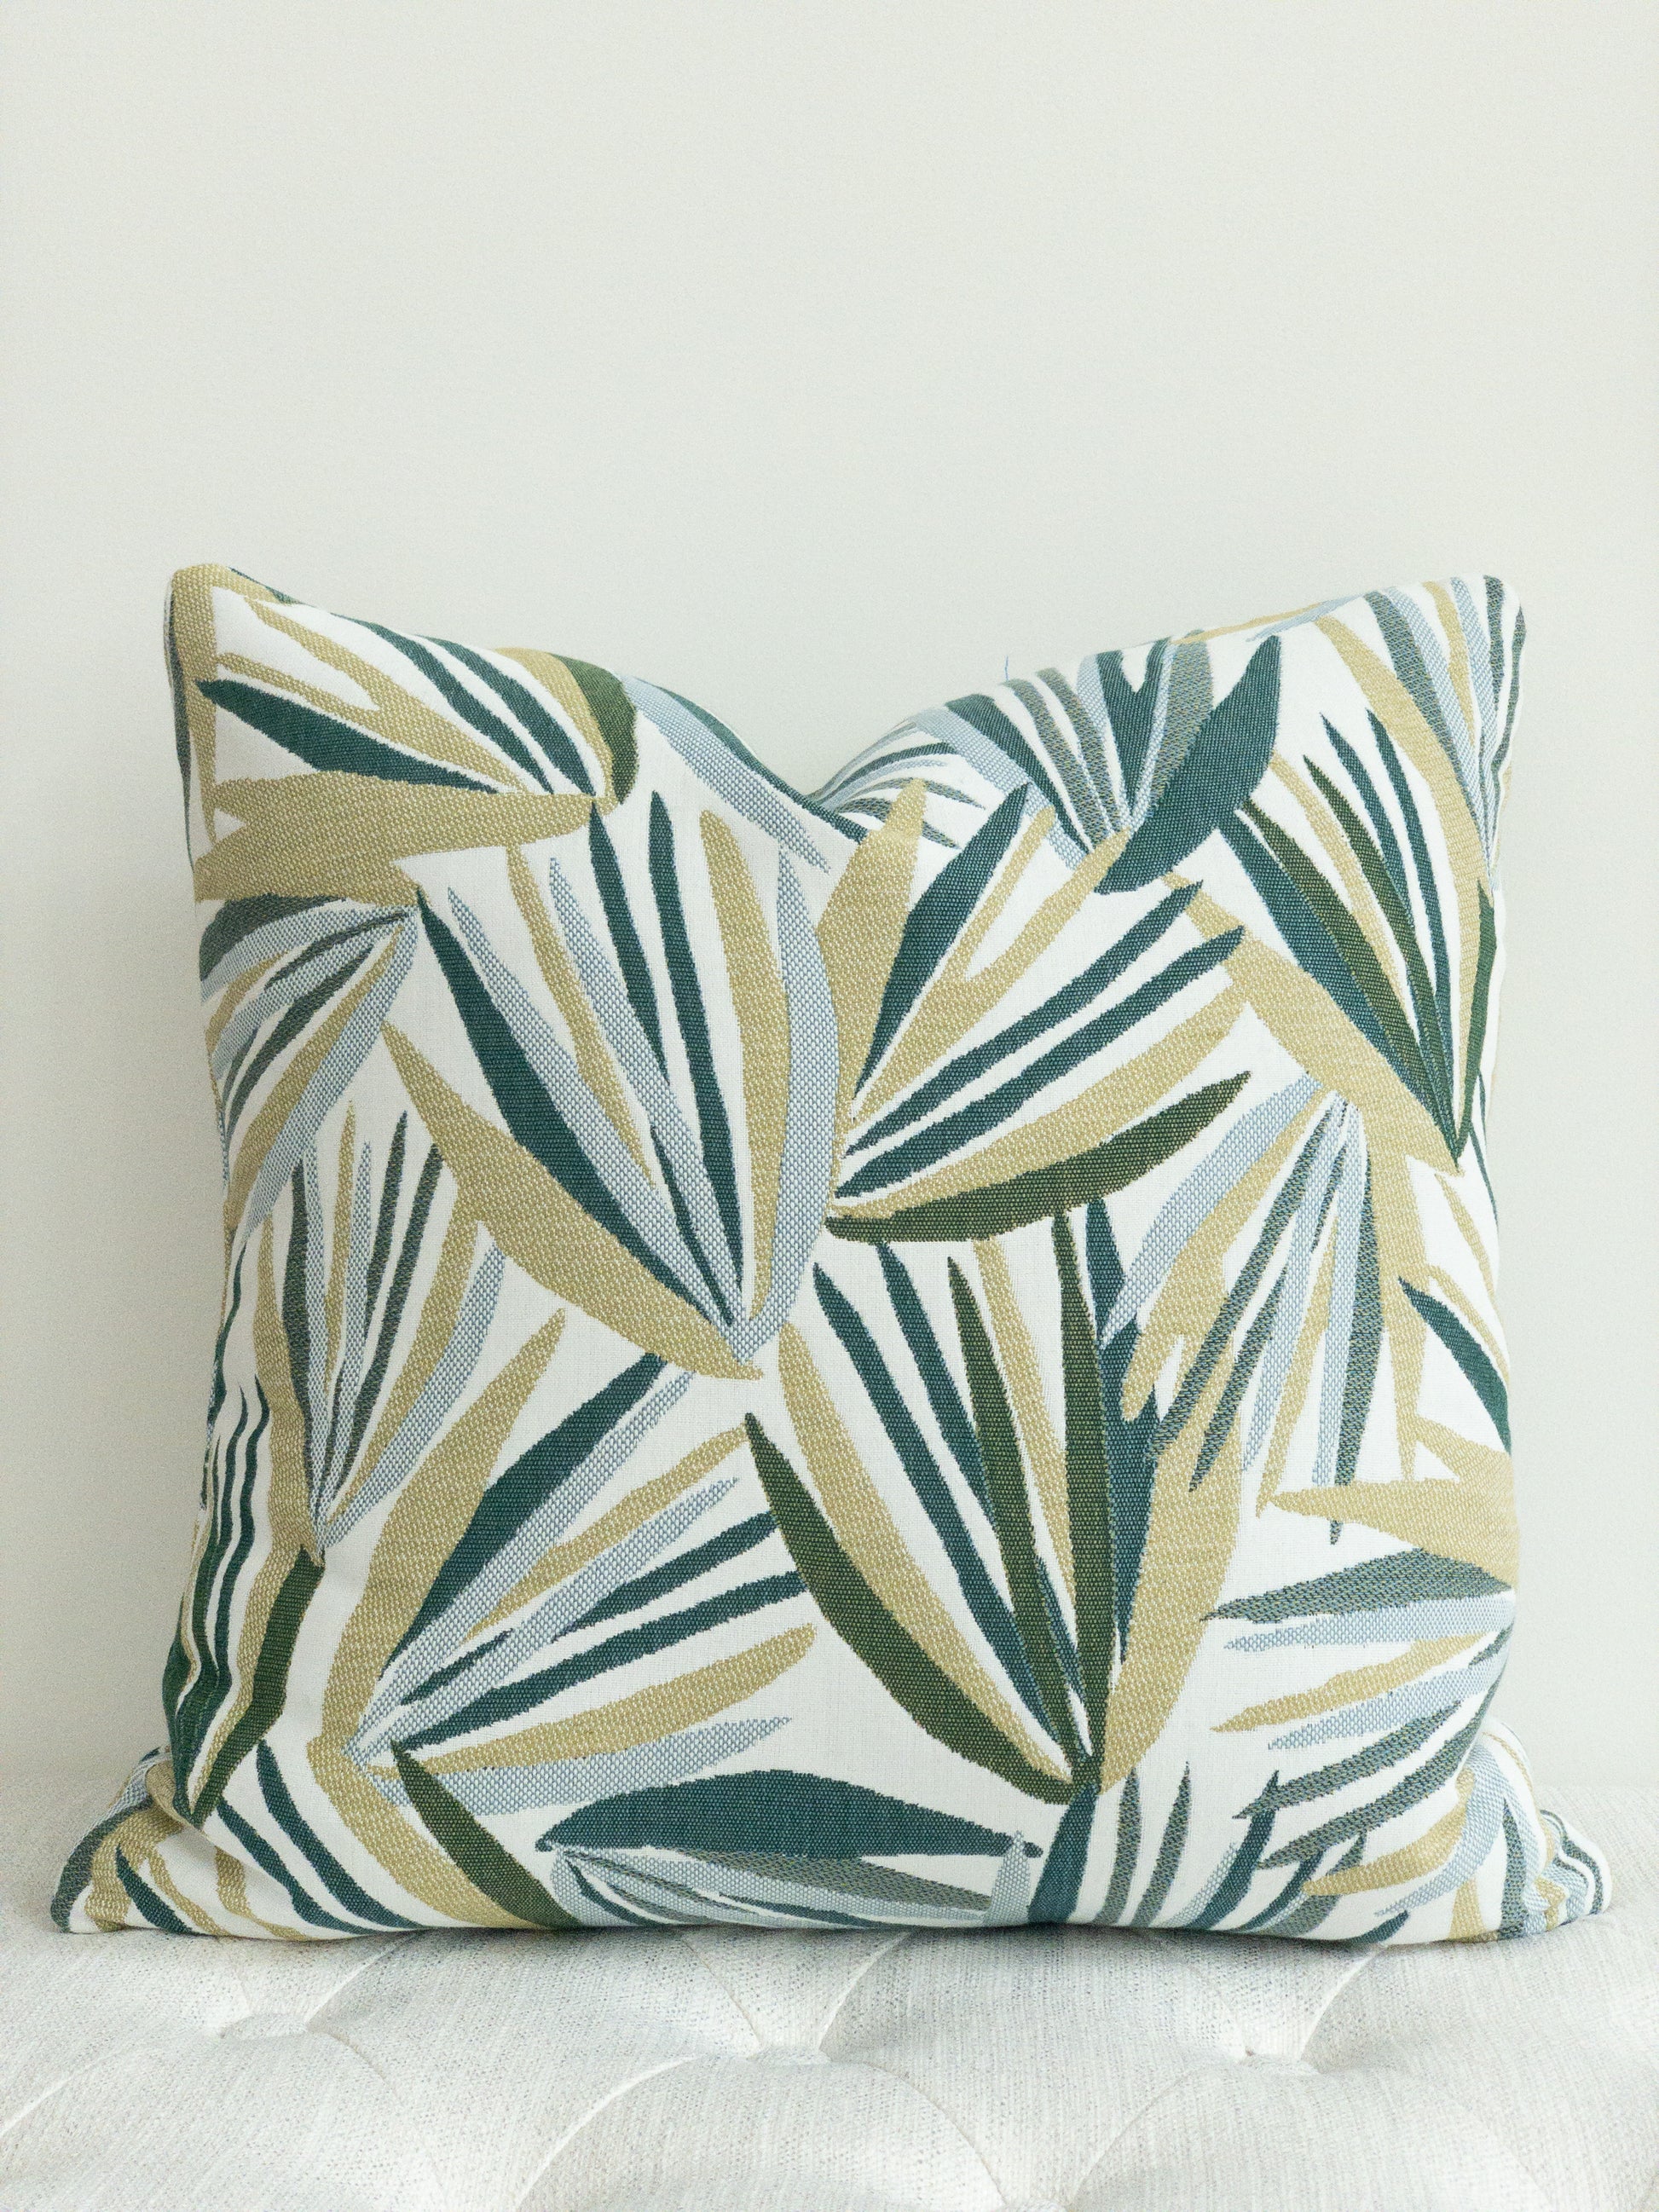 Square designer indoor outdoor pillow with palm motif in shades of green on a white background,